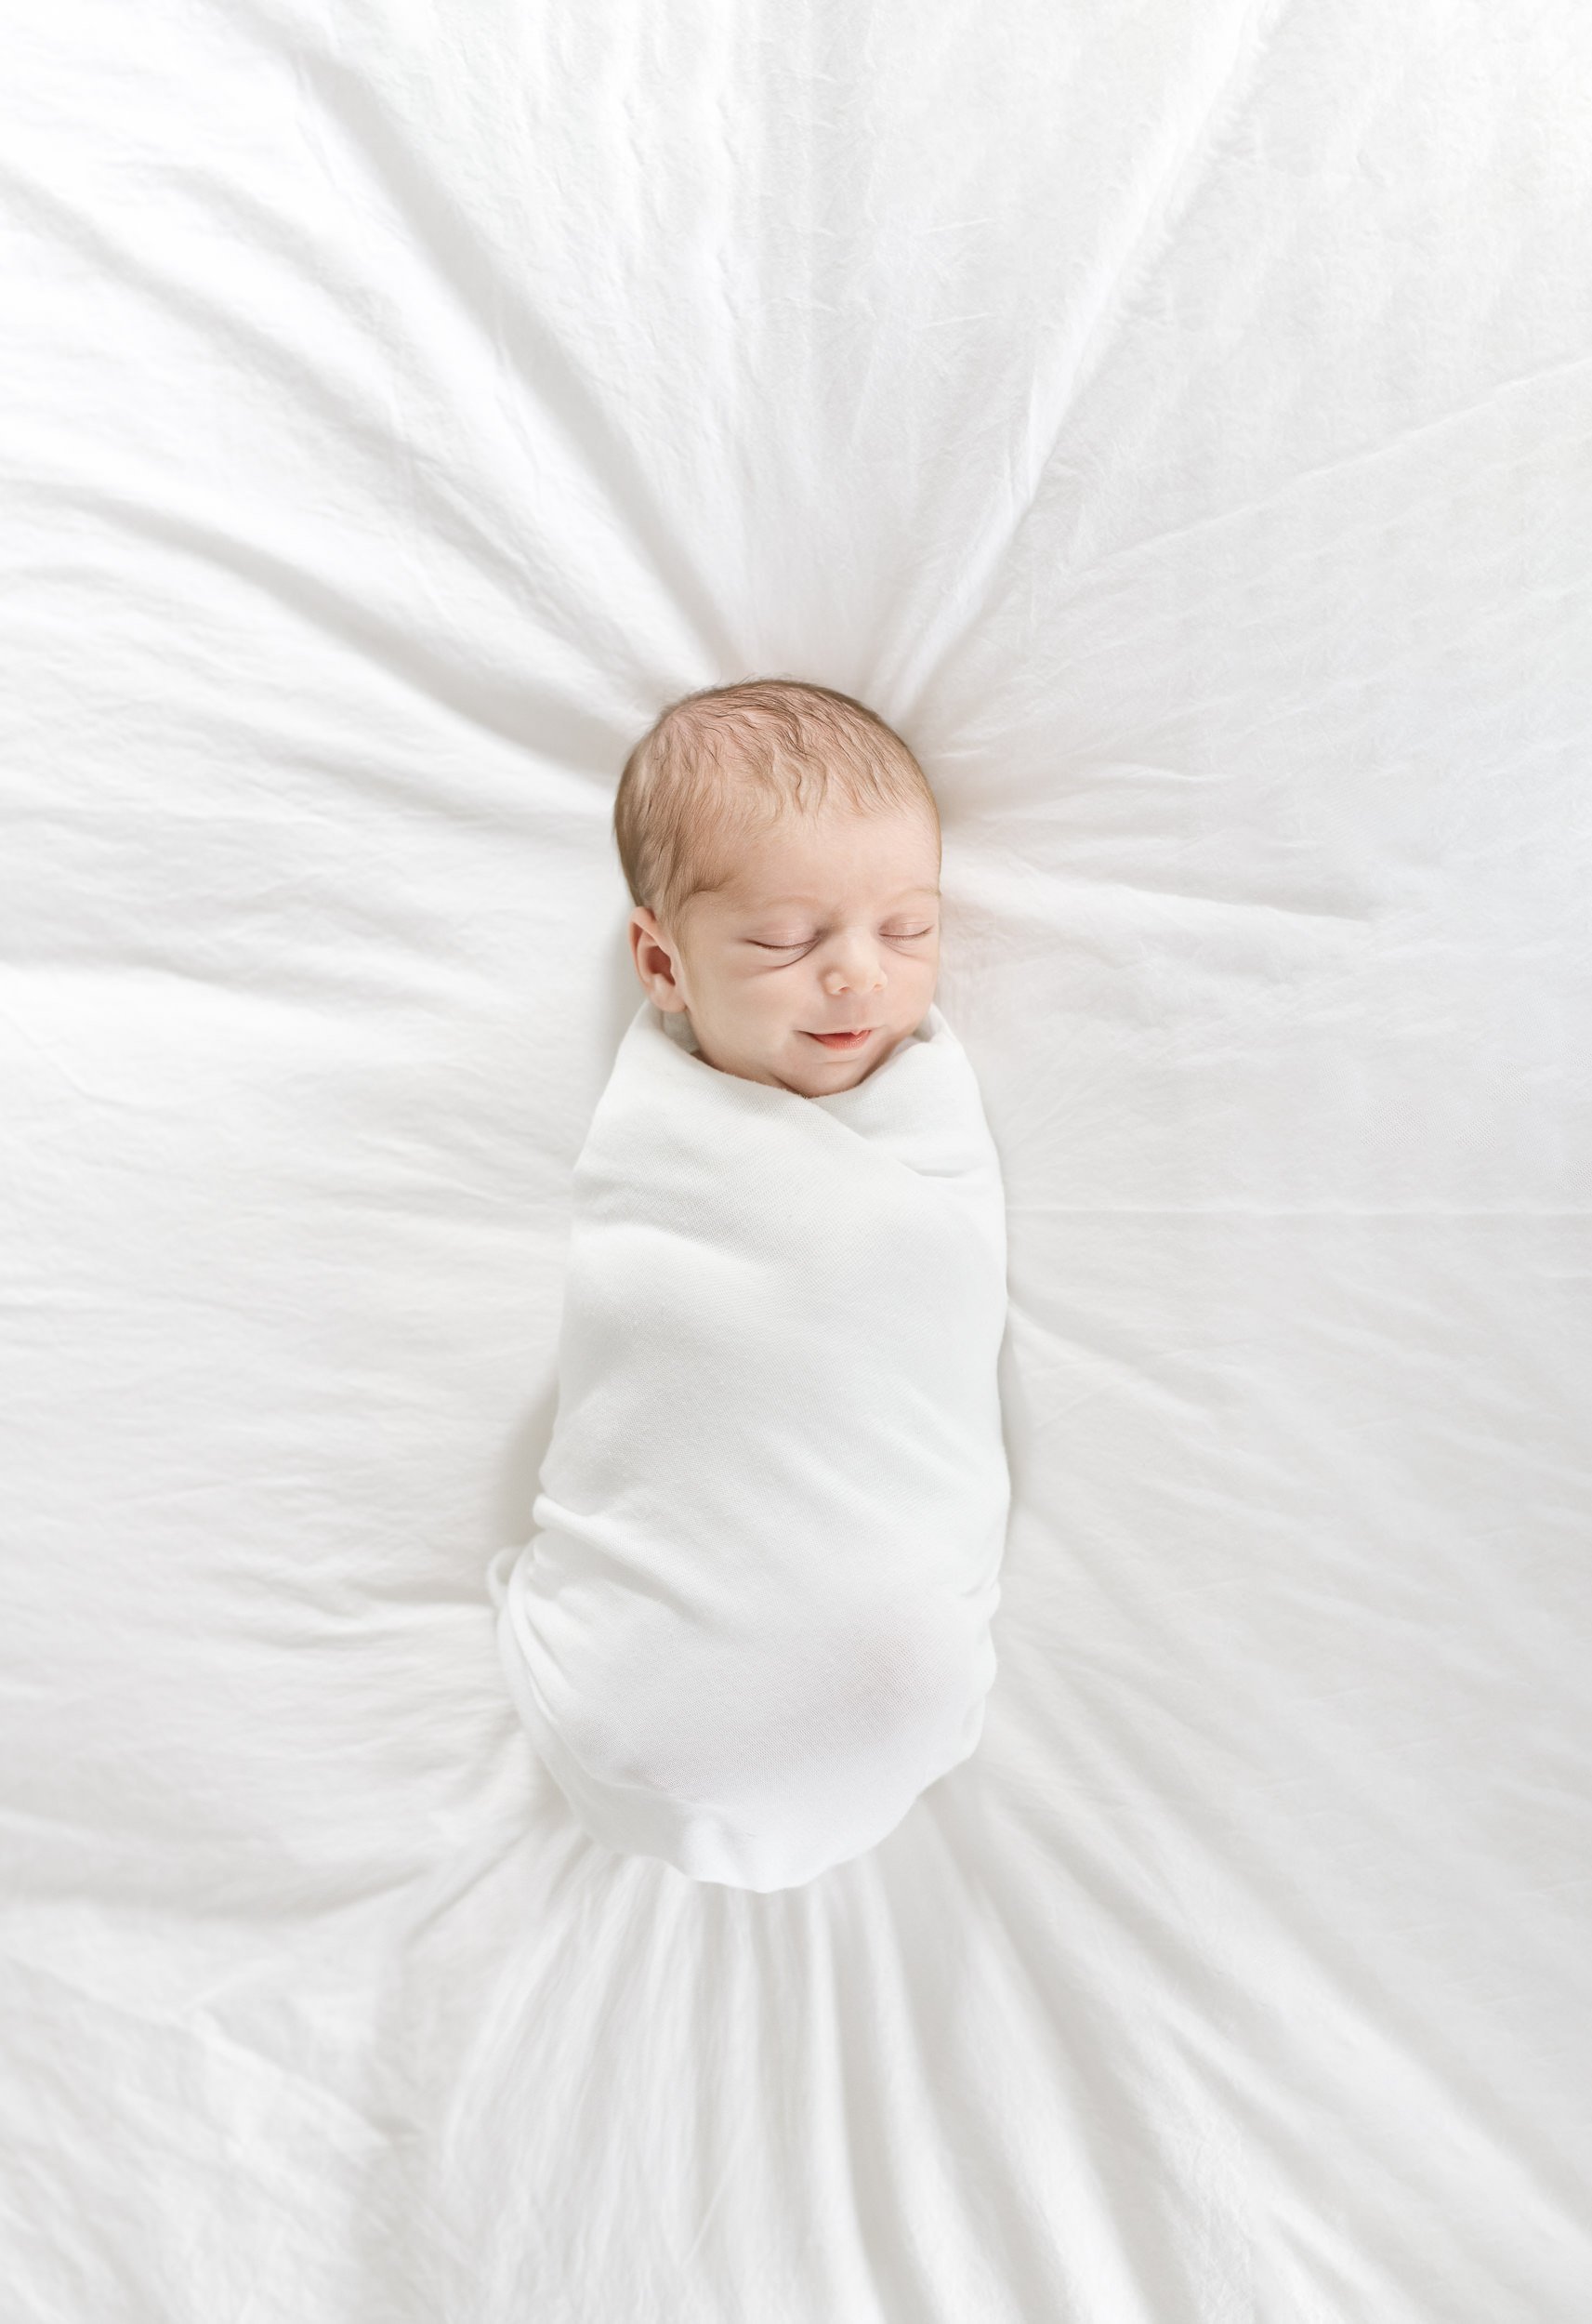  Baby swaddled and sleeping on a bed during an in-home newborn session with Nicole Hawkins Photography. baby napping on bed #NicoleHawkinsPhotography #NicoleHawkinsFamily #Newborns #InHomeNewborns #NicoleHawkinsNewborns #NJnewborns #babygirl 